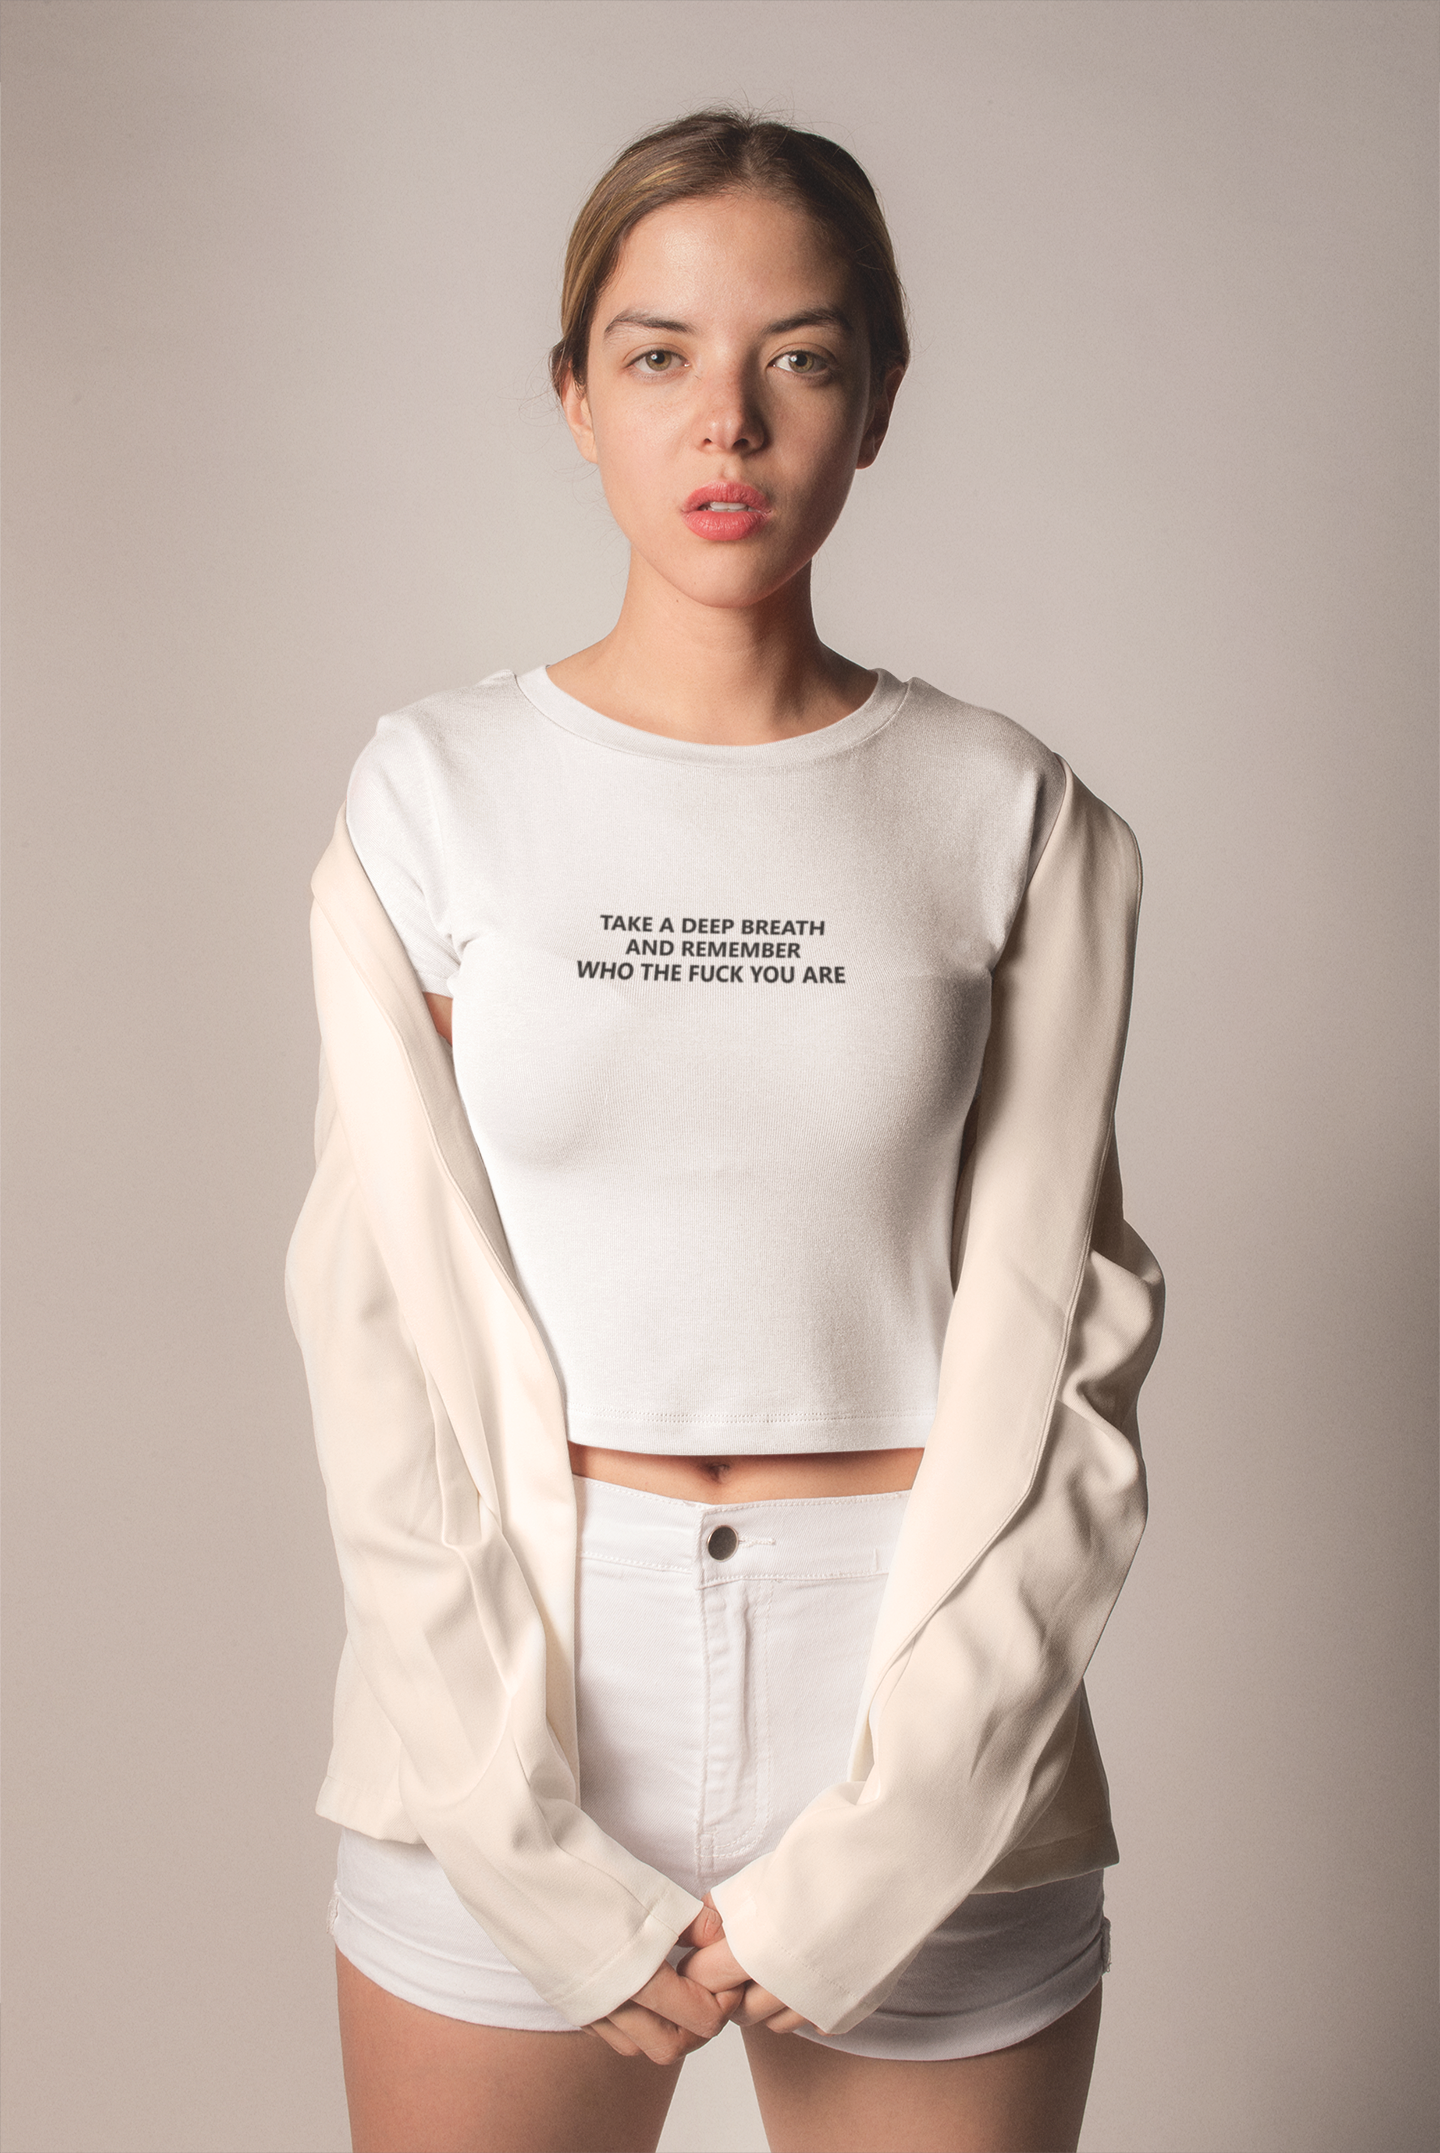 Take A Deep Breath And Remember Who The Fuck You Are Quotes Women Crop Top- FunkyTeesClub